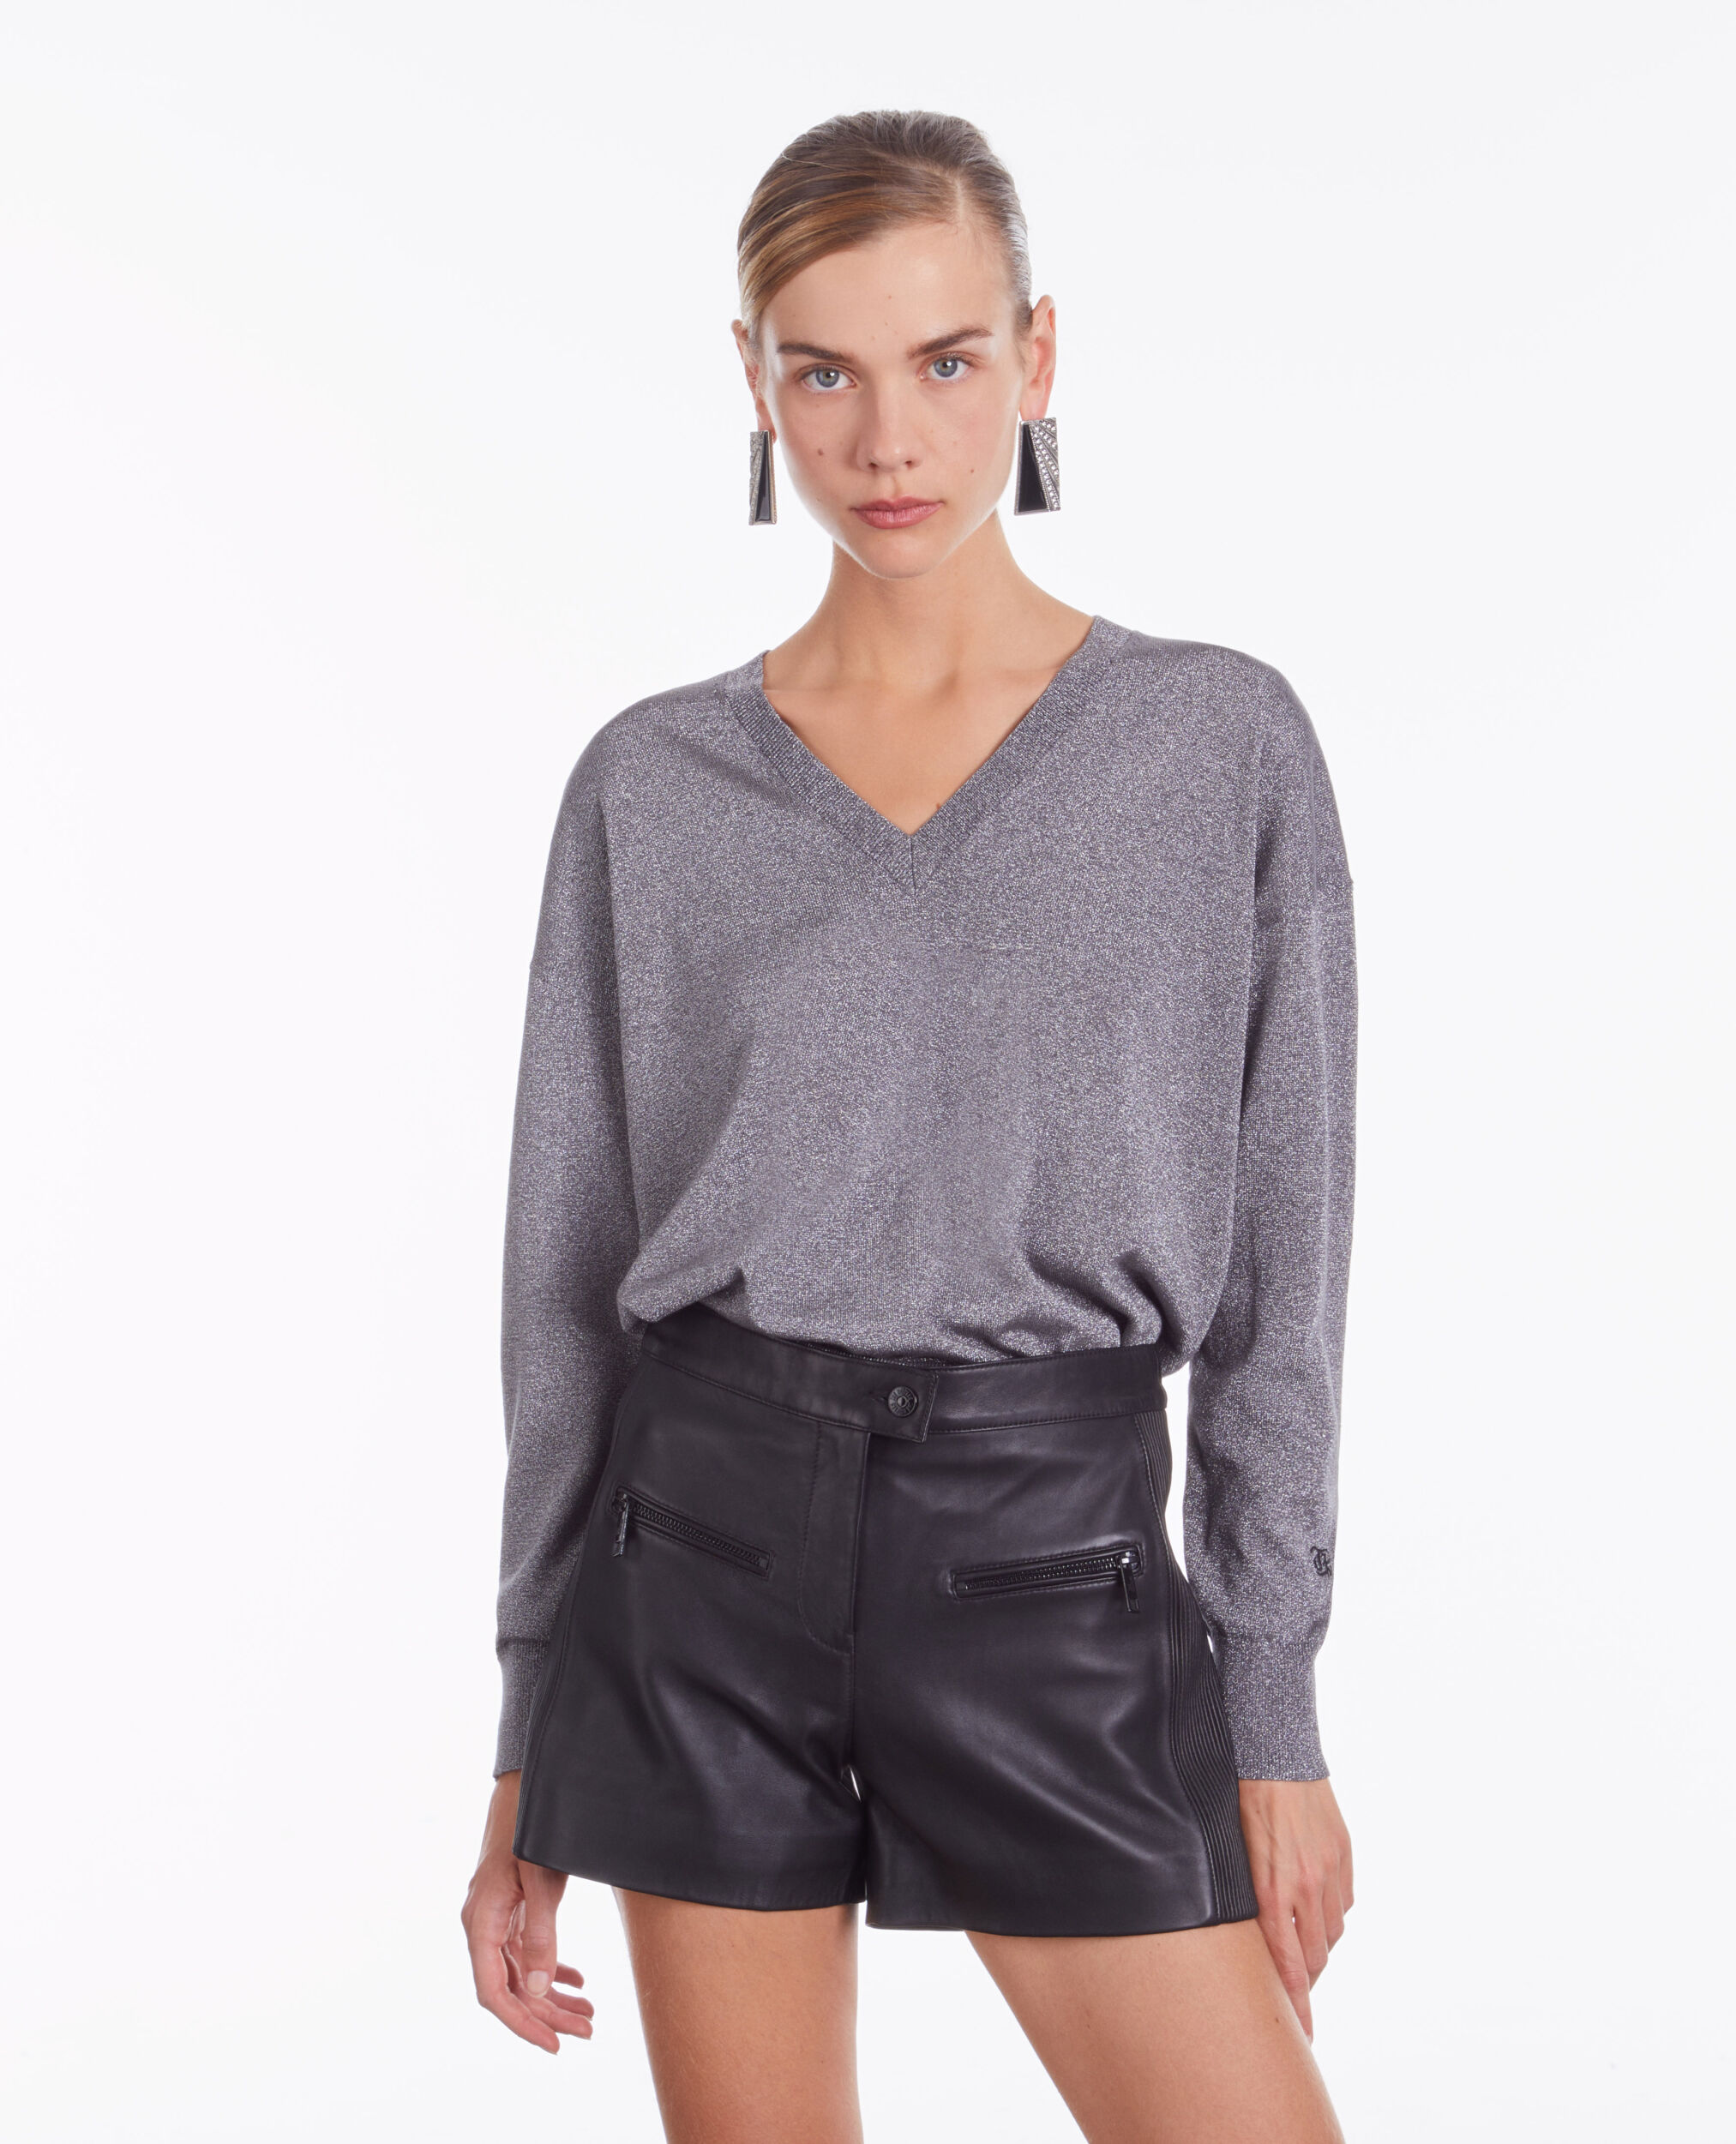 Grey glitter effect sweater, GRIS / SILVER, hi-res image number null